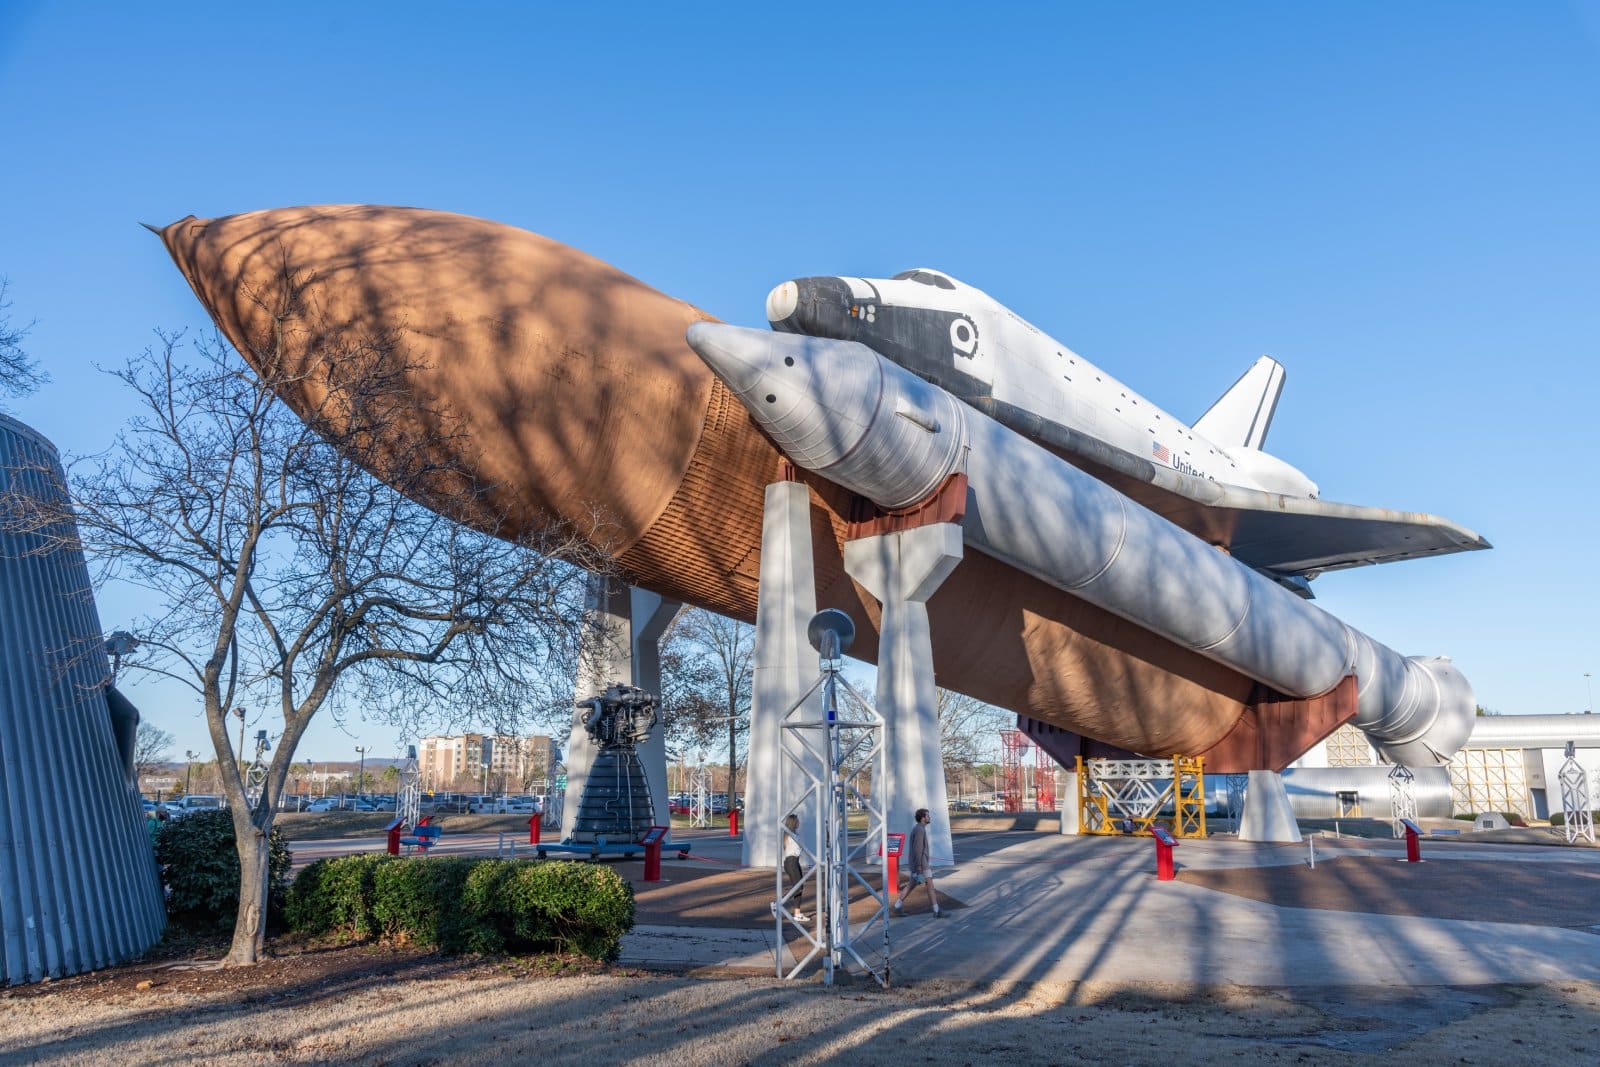 <p class="wp-caption-text">Image Credit: Shutterstock / Michael Gordon</p>  <p><span>Yup, that’s right. Down in Huntsville, they don’t just grow cotton; they’re buildin’ rockets. The U.S. Space & Rocket Center ain’t just a museum; it’s where the space race done got its legs. Who’d thunk it?</span></p>